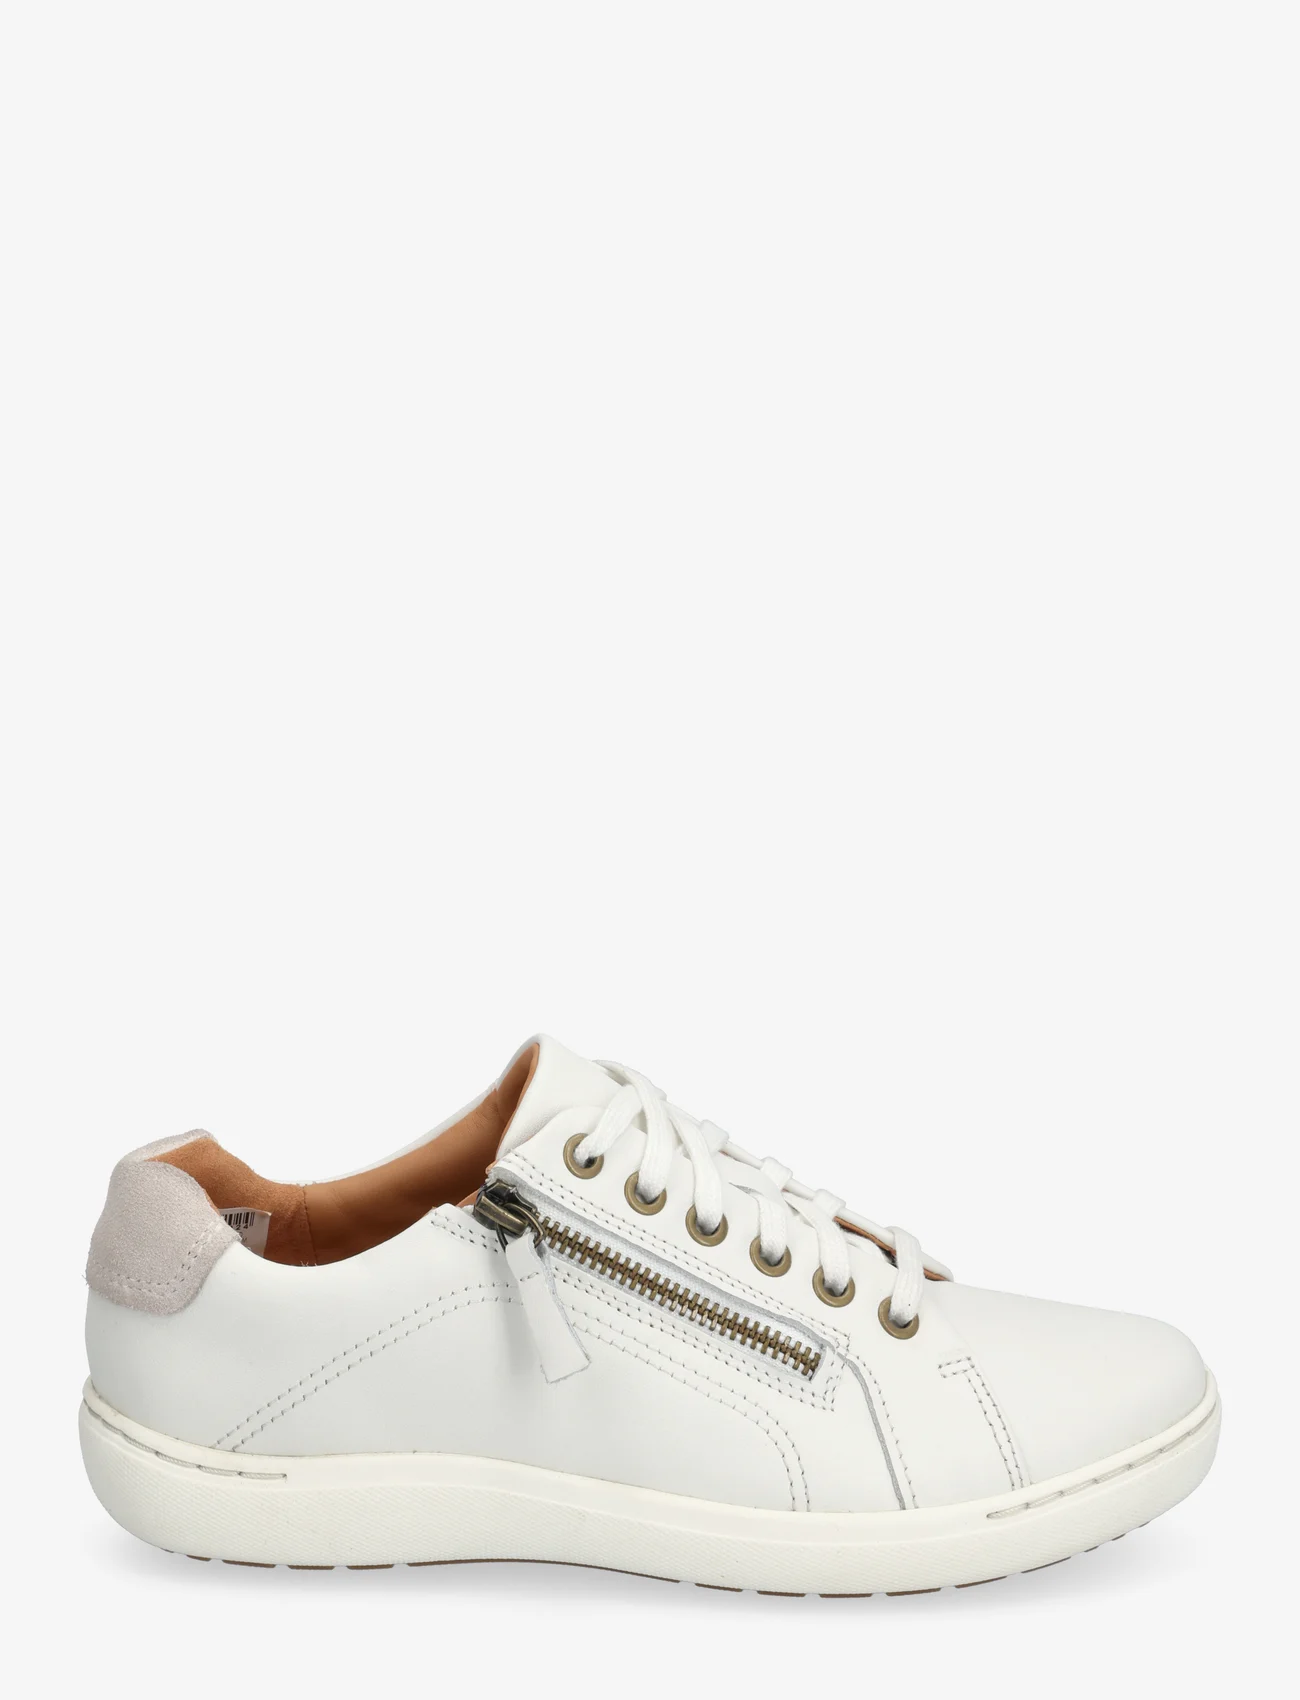 Clarks - Nalle Lace D - låga sneakers - 1255 white leather - 1